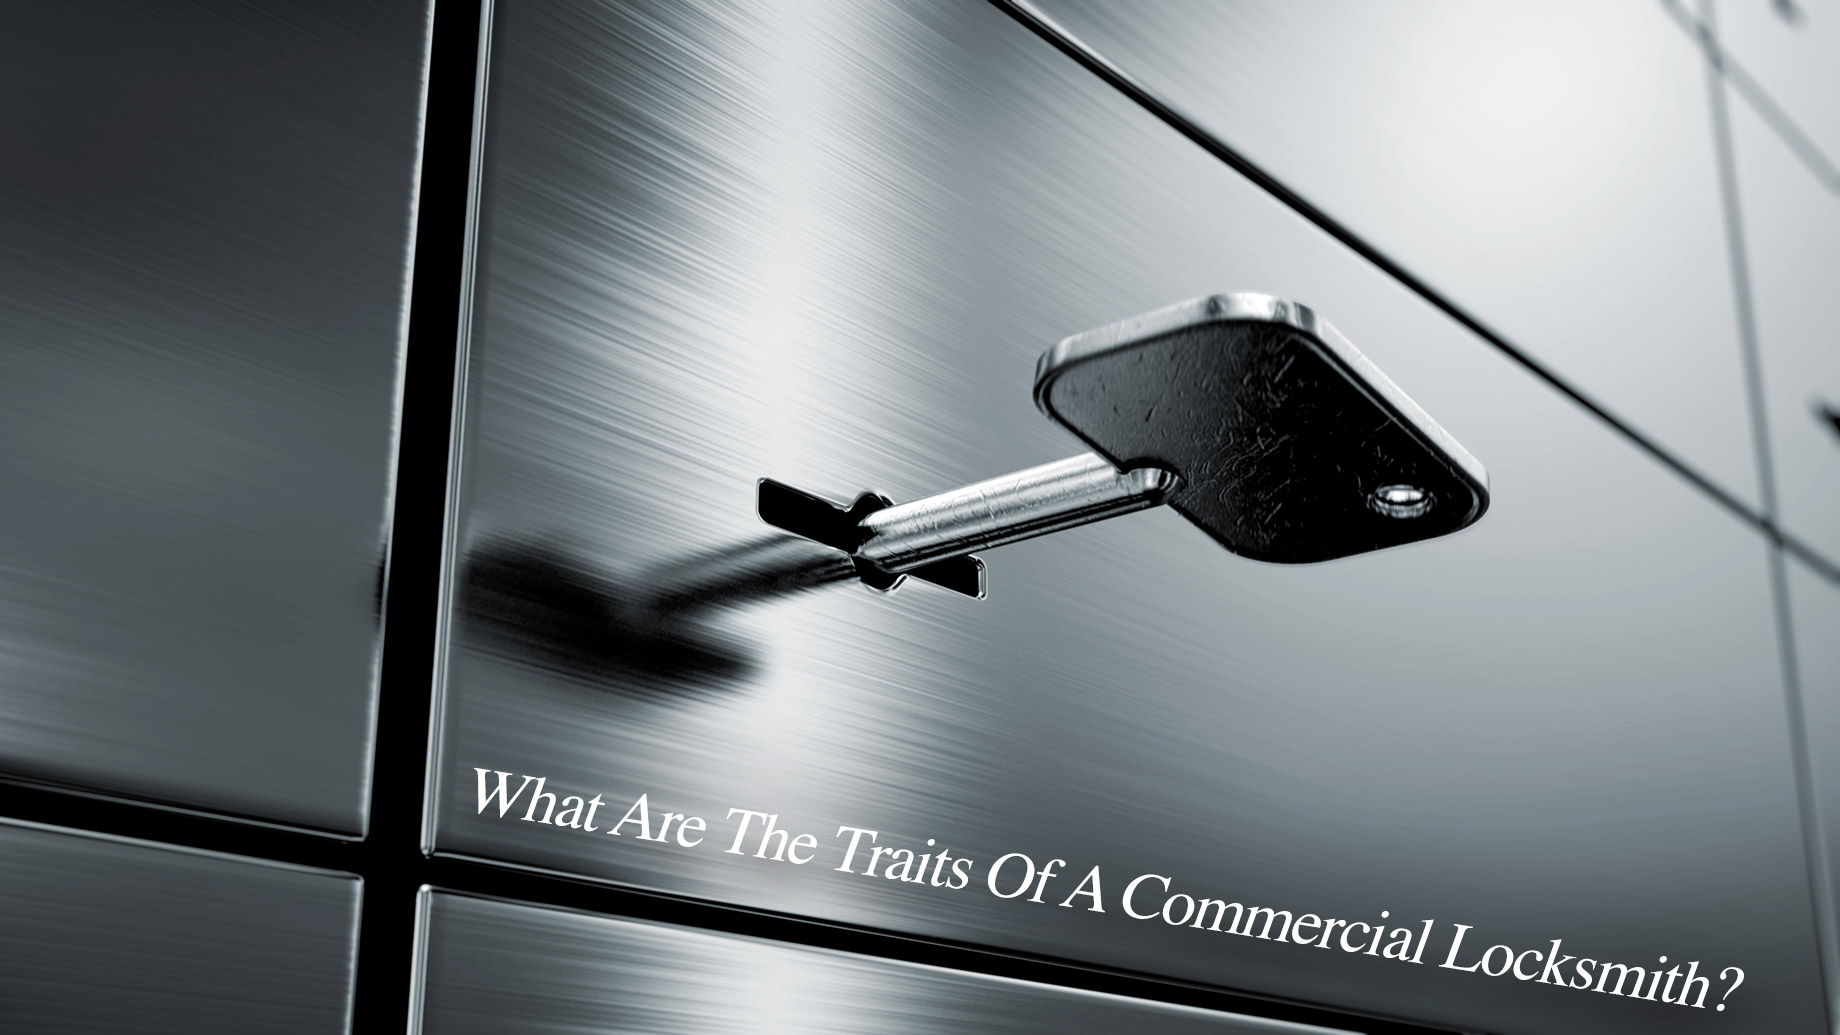 What Are The Traits Of A Commercial Locksmith?